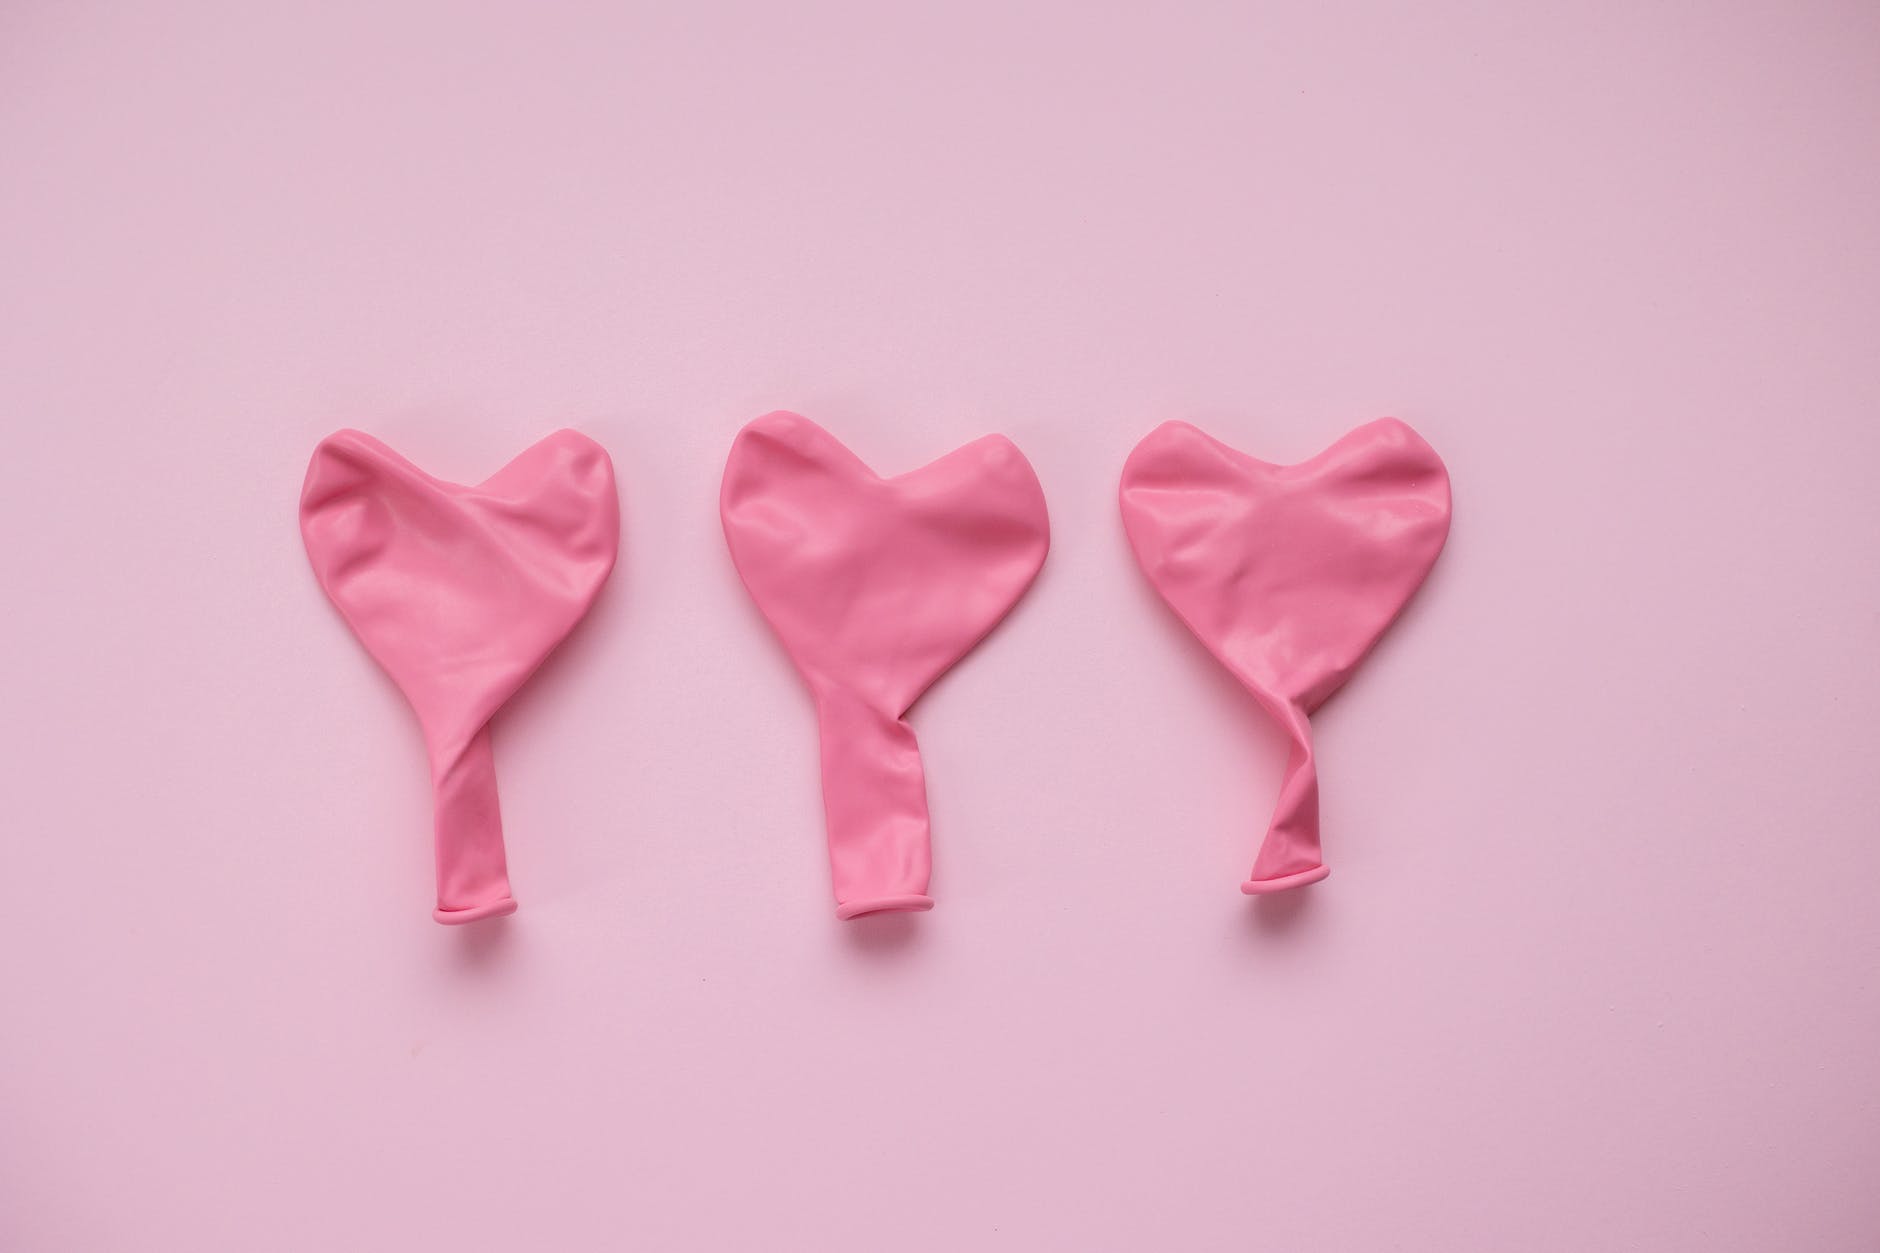 Why My Deflated Balloons May Not Mean the World is Out to Get Me. |  elephant journal